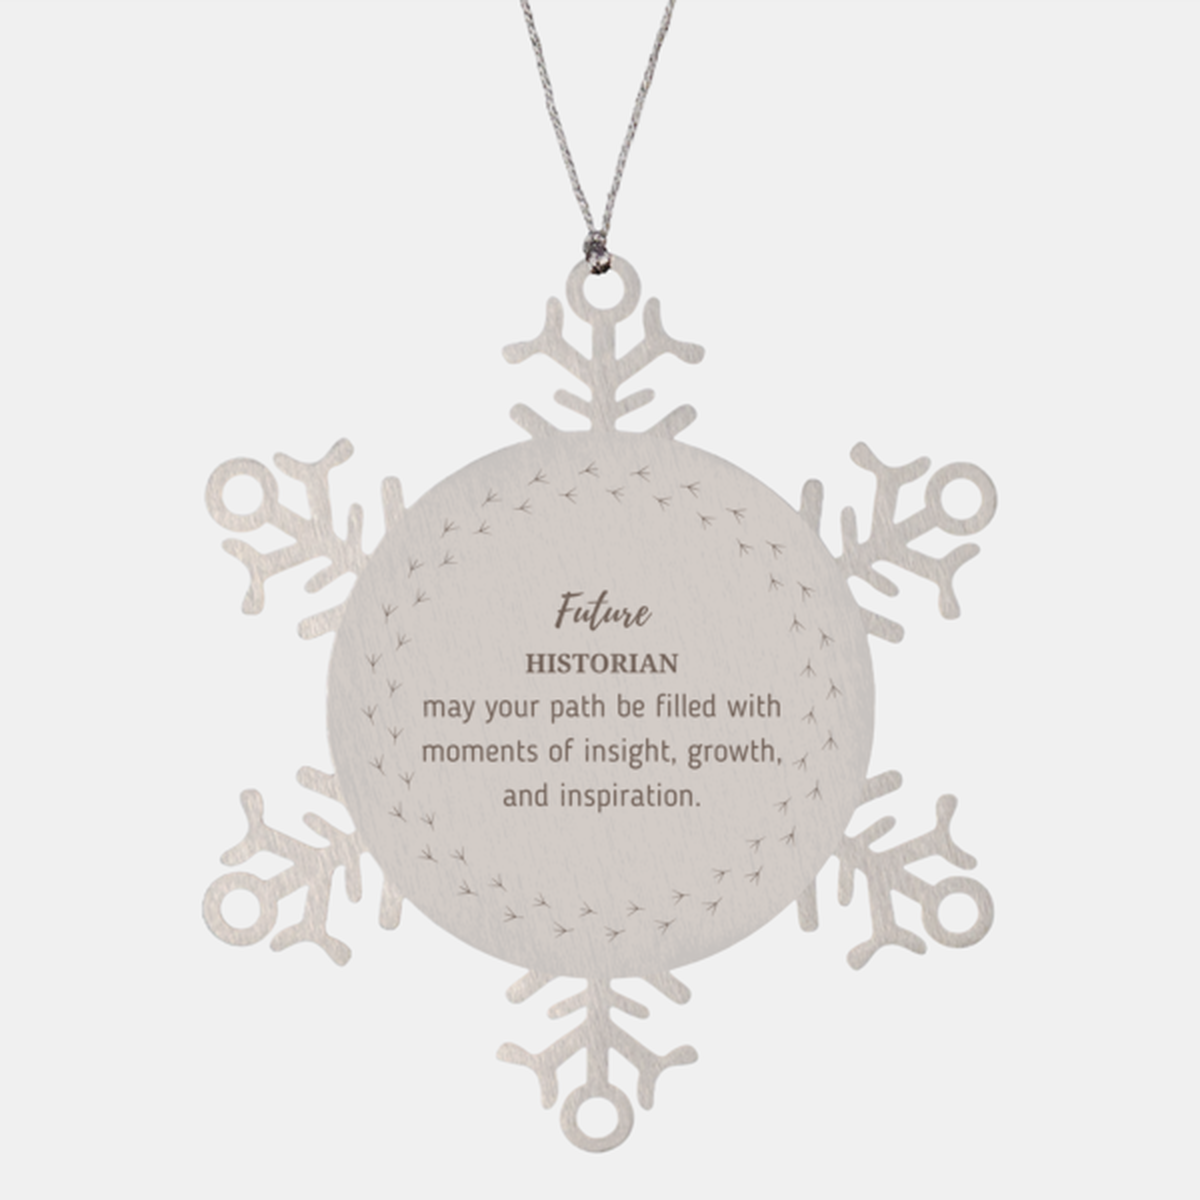 Future Historian Gifts, May your path be filled with moments of insight, Graduation Gifts for New Historian, Christmas Unique Snowflake Ornament For Men, Women, Friends